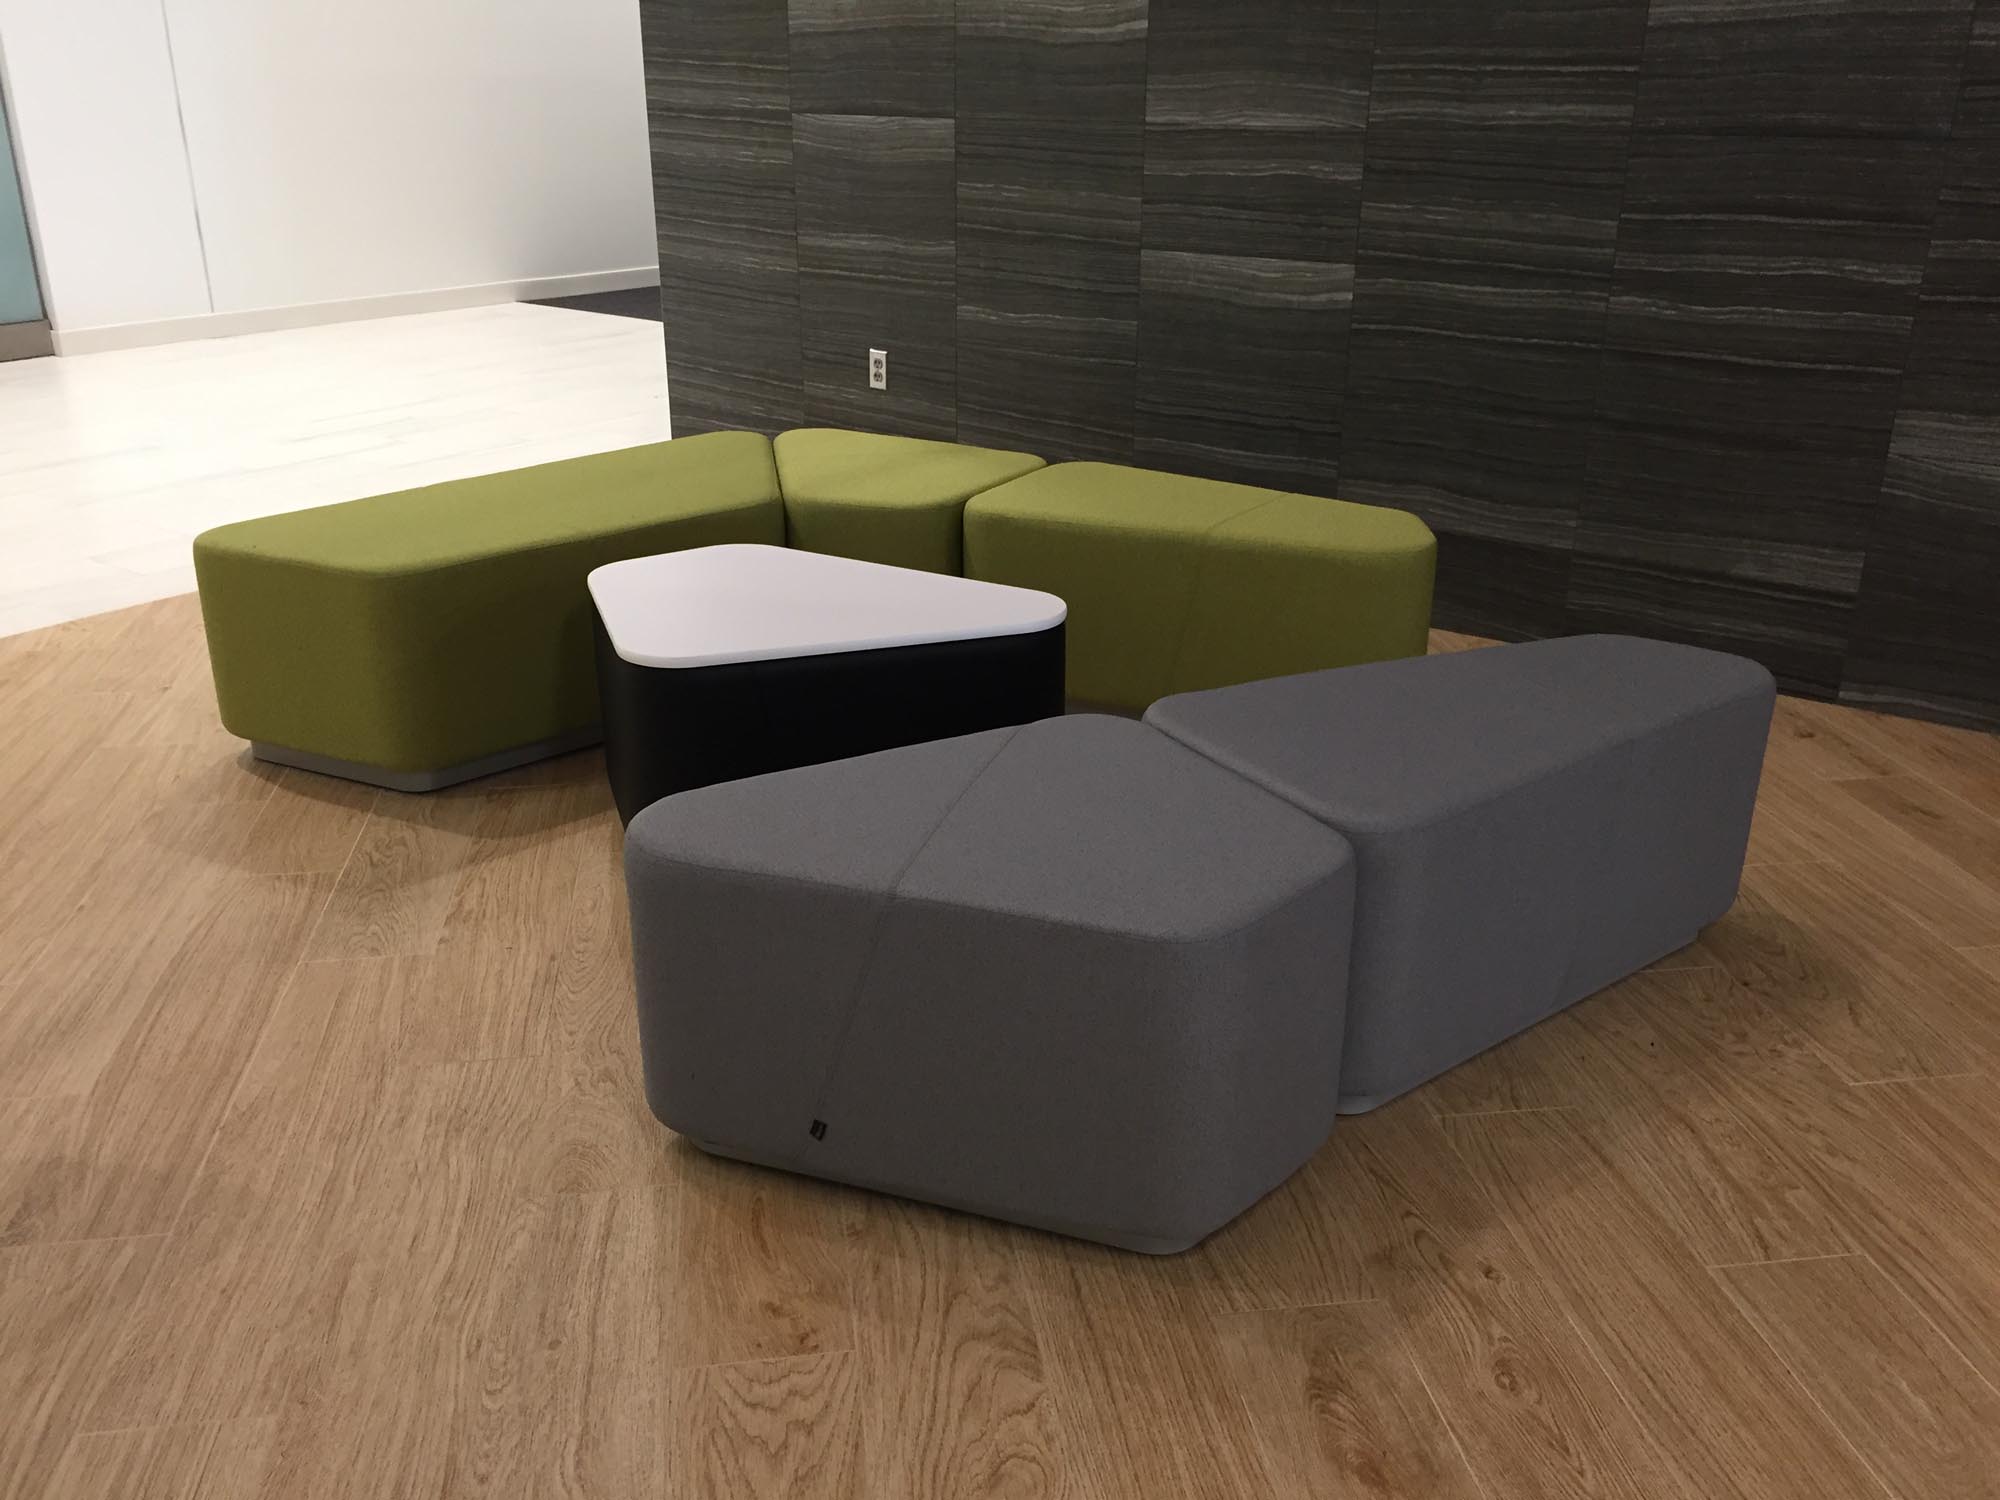 Bouty's Modular Lounge gray and green multiple modules